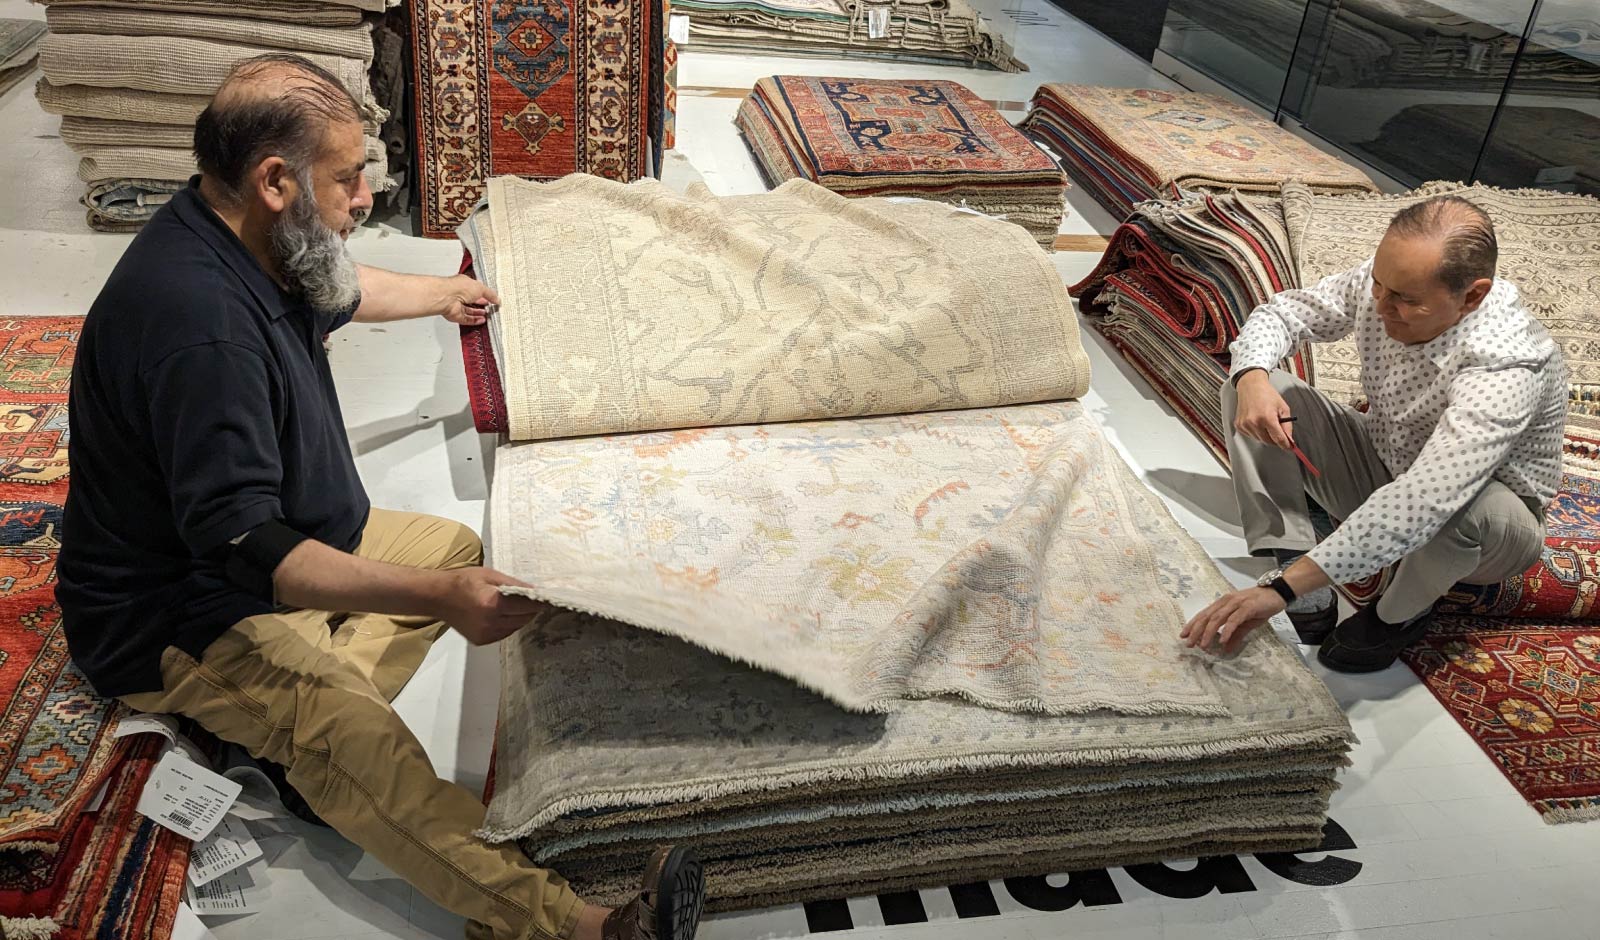 Two men display a stack of woven, Persian-style rugs